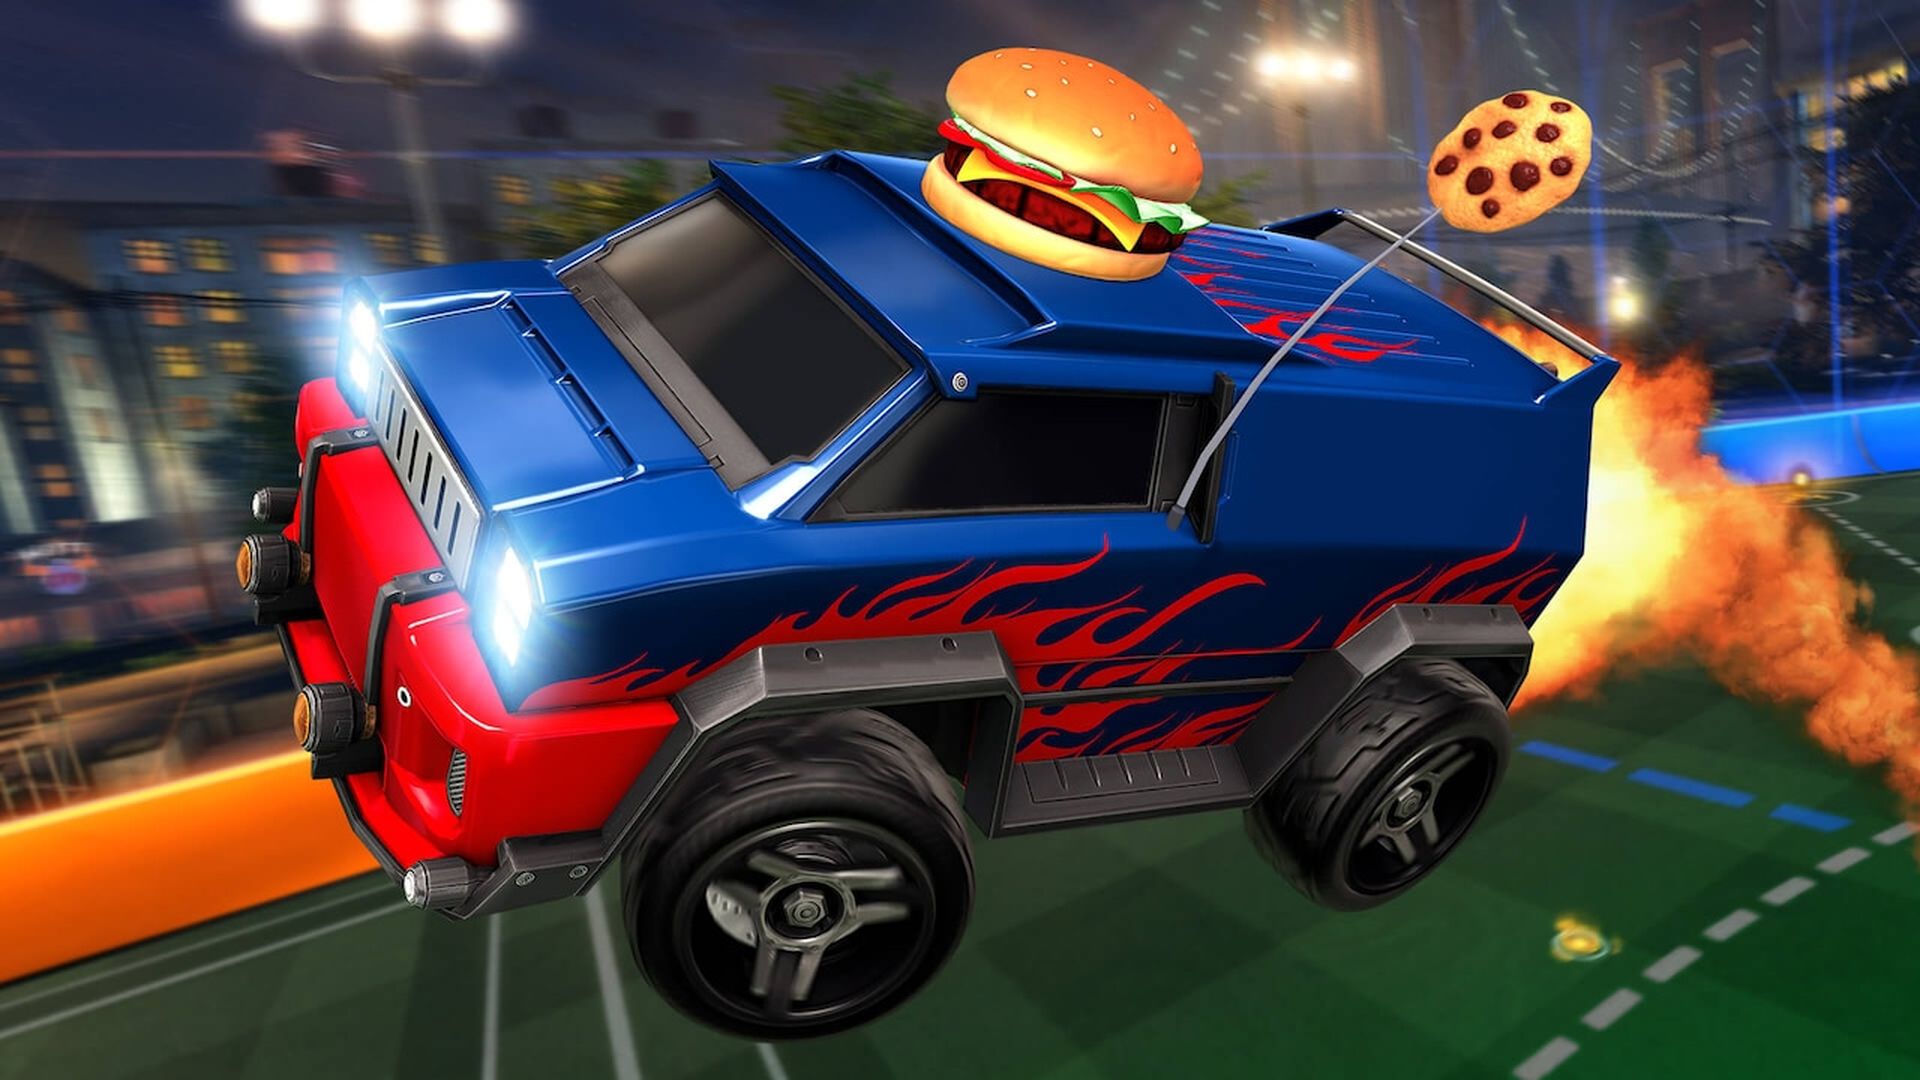 In this article, we are going to be covering is Rocket League on Steam, so you know if you can play it using the popular game store and launcher.